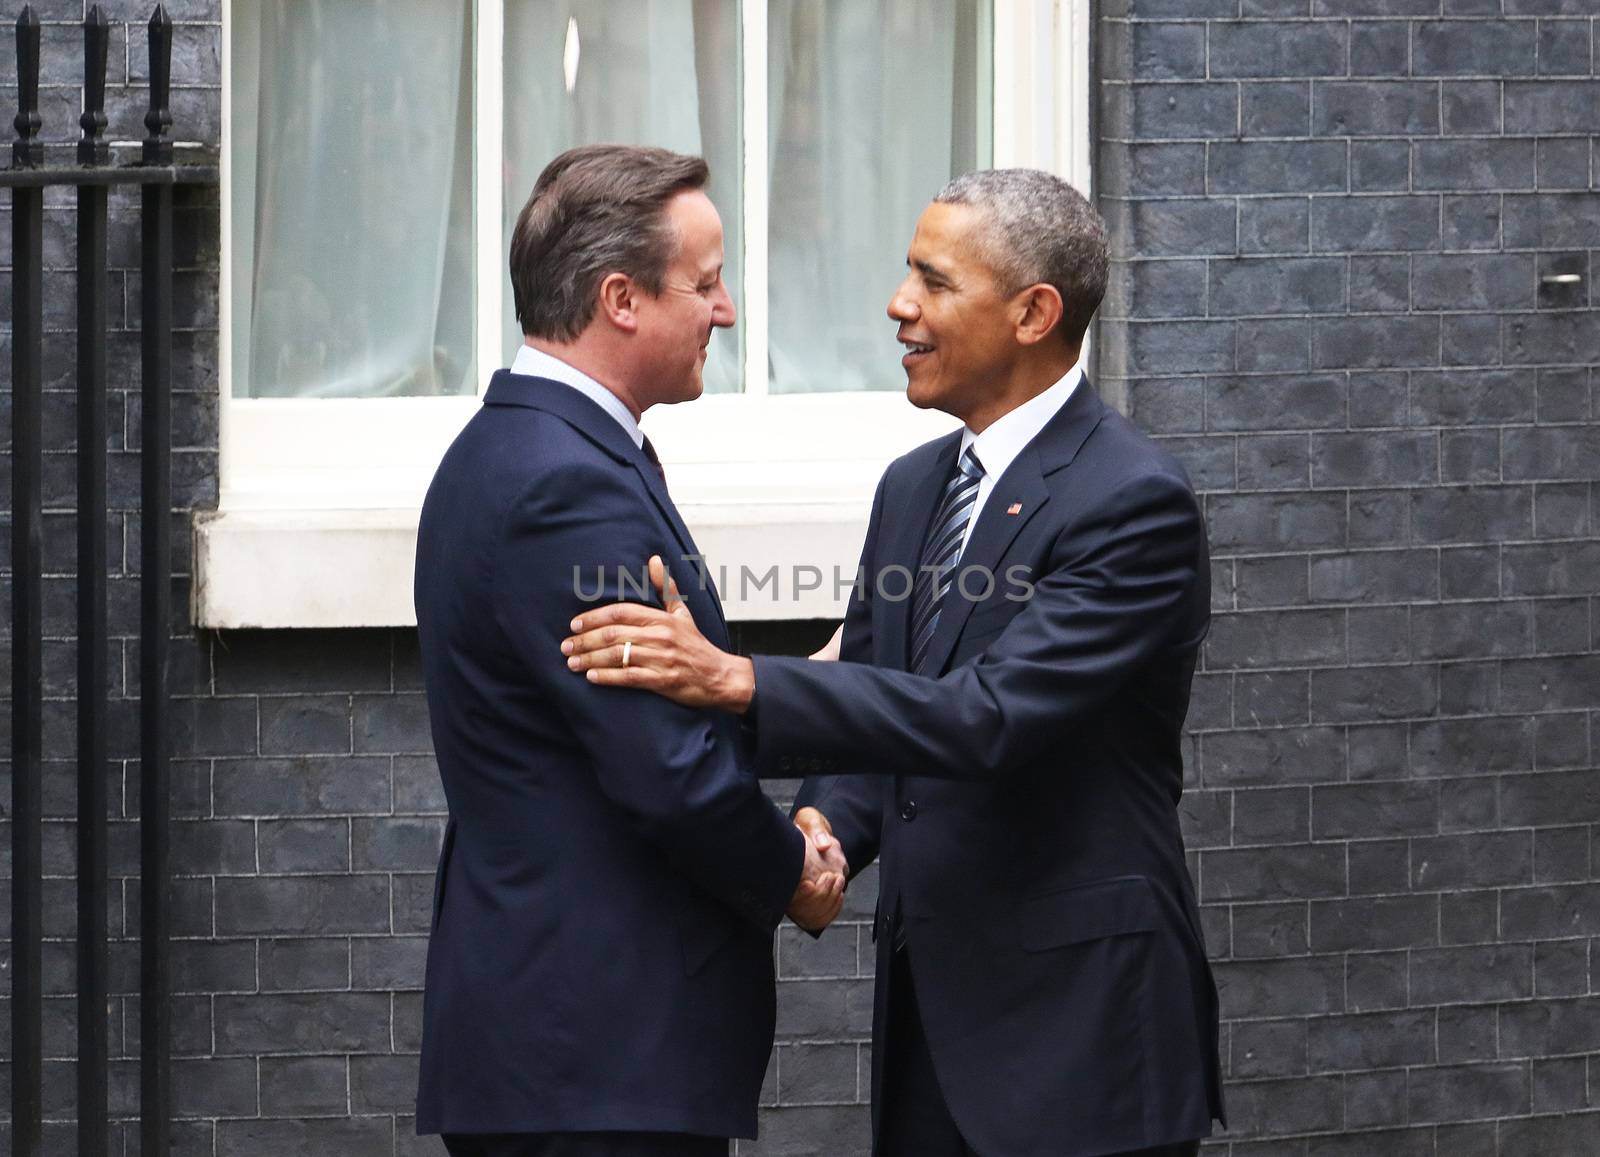 UNITED-KINGDOM, London: President Barack Obama (R) and British Prime Minister David Cameron (L) shake hands as they meet at Downing Street on April 22, 2016 in London, United-Kingdom. The President and his wife are currently on a brief visit to the UK where they will have lunch with HM Queen Elizabeth II at Windsor Castle and dinner with Prince William and his wife Catherine, Duchess of Cambridge at Kensington Palace. 